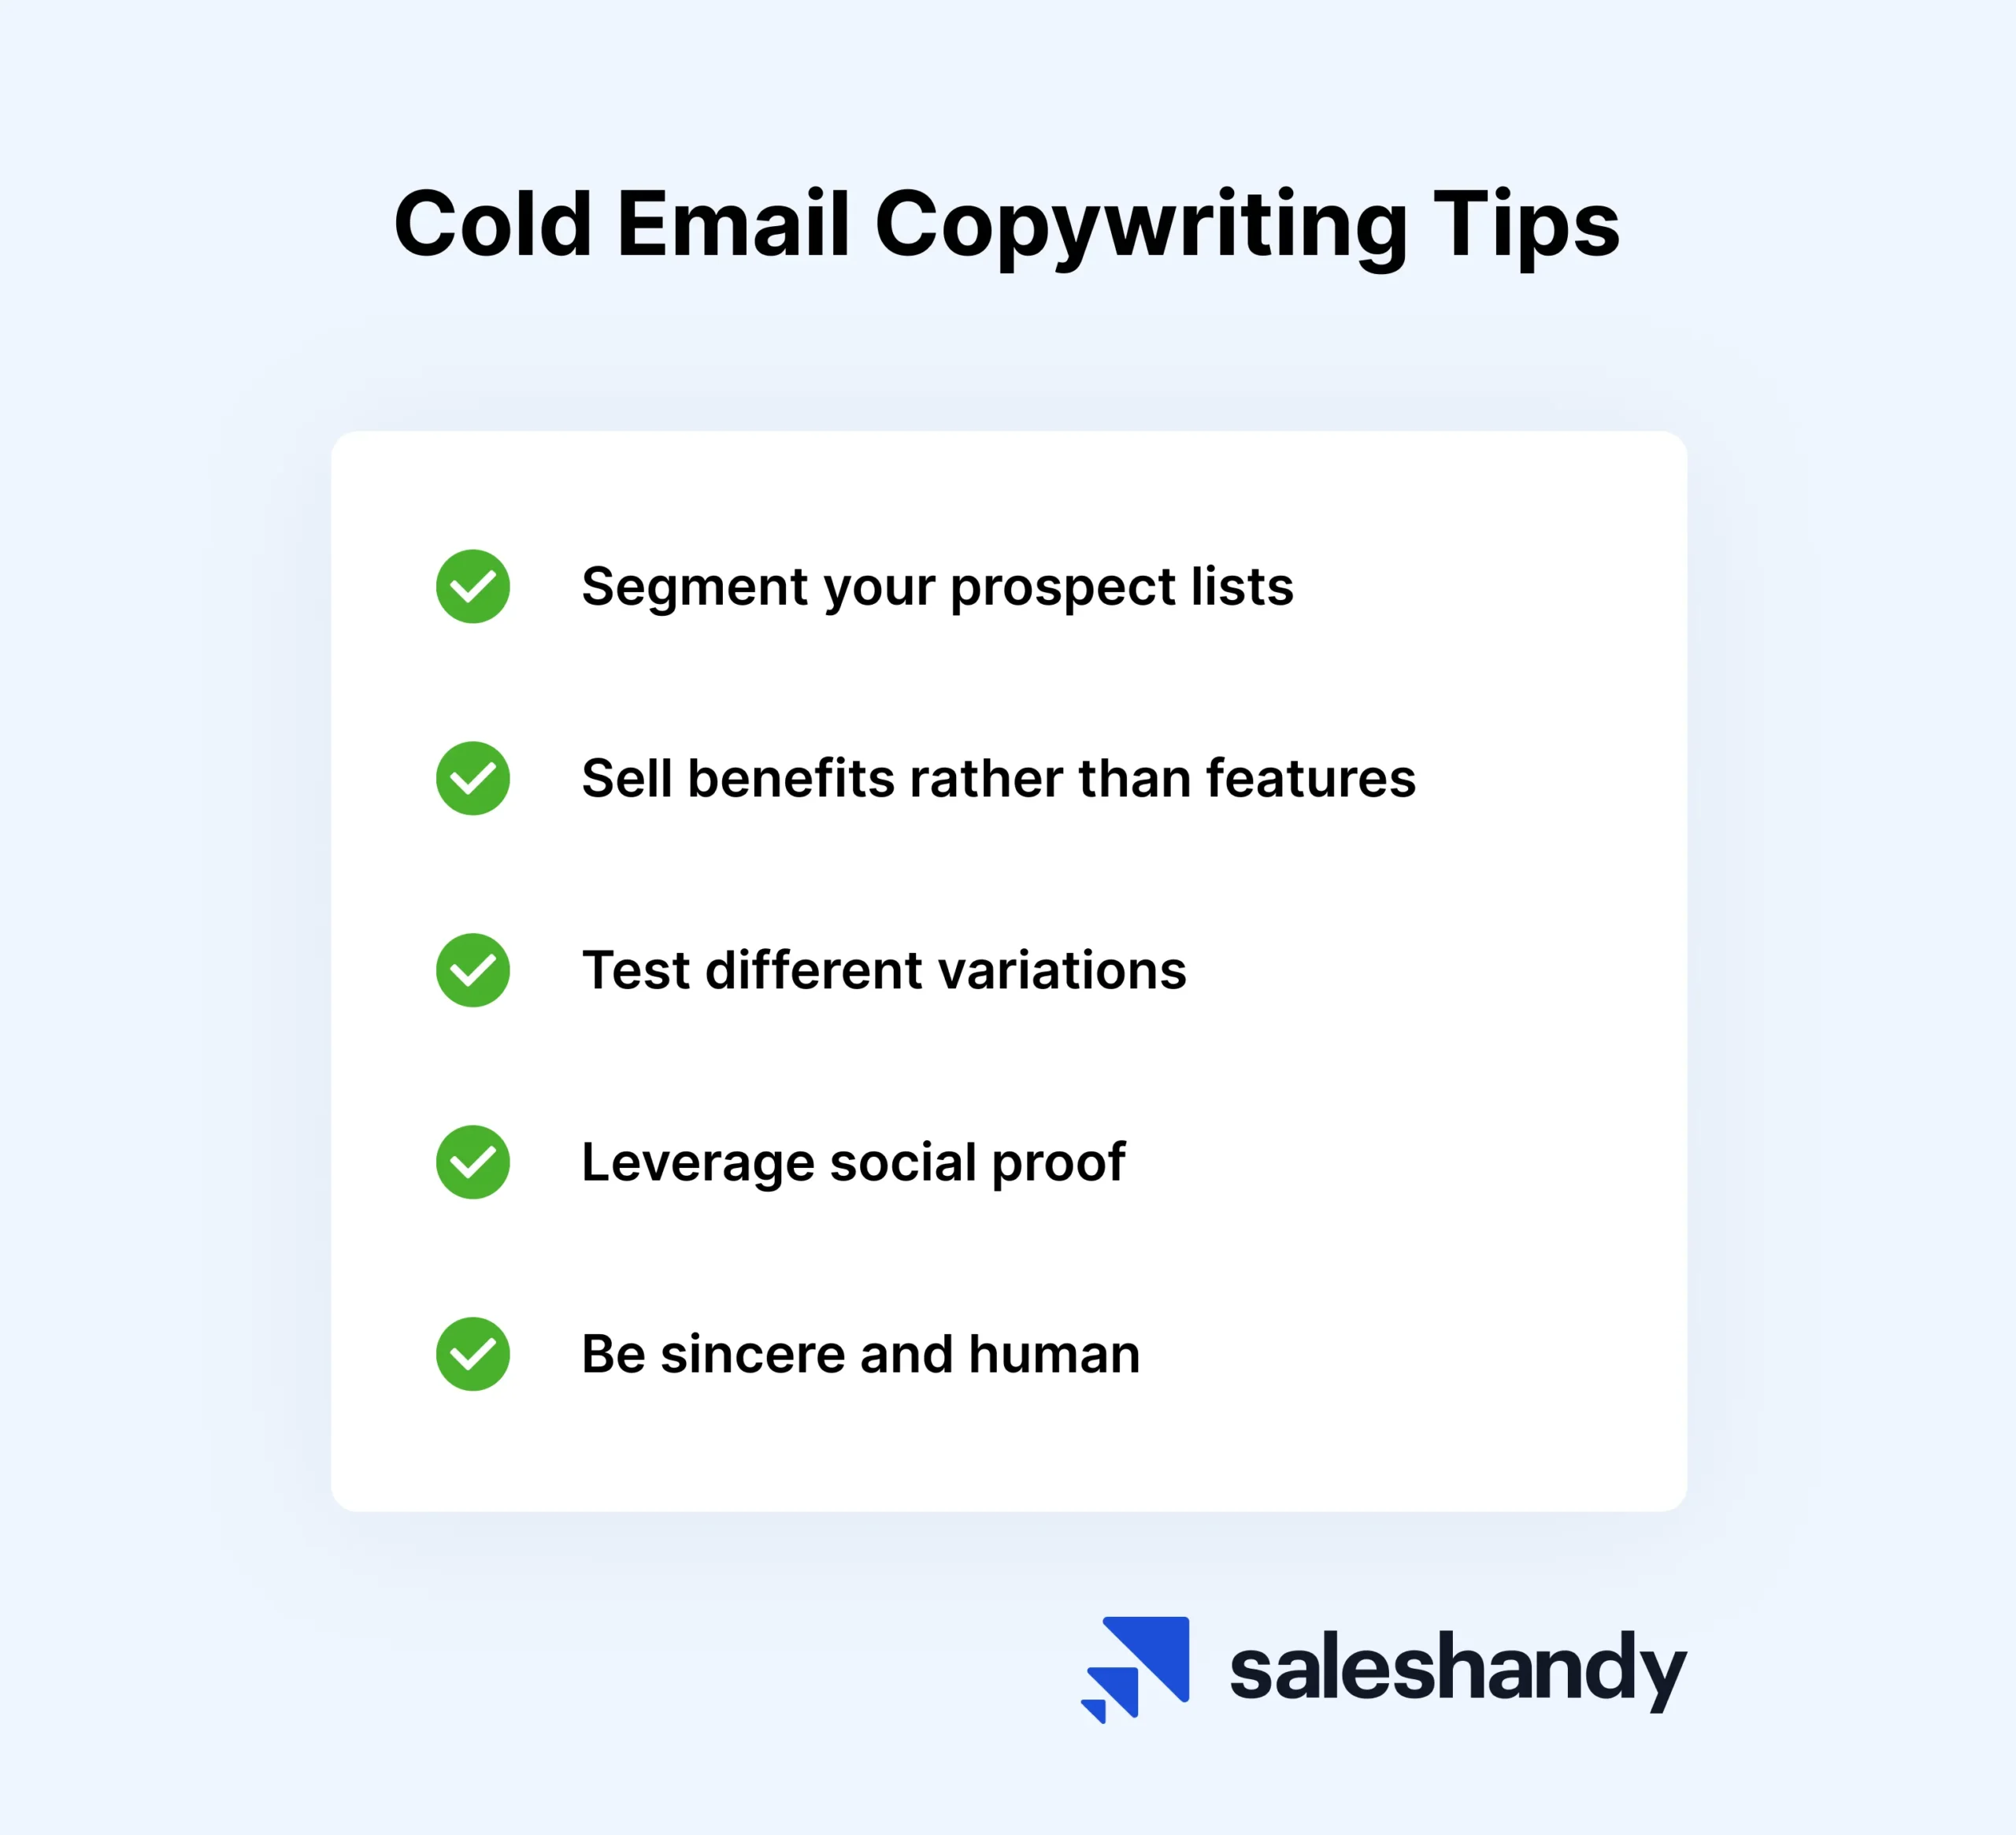 Cold Email Copywriting Tips